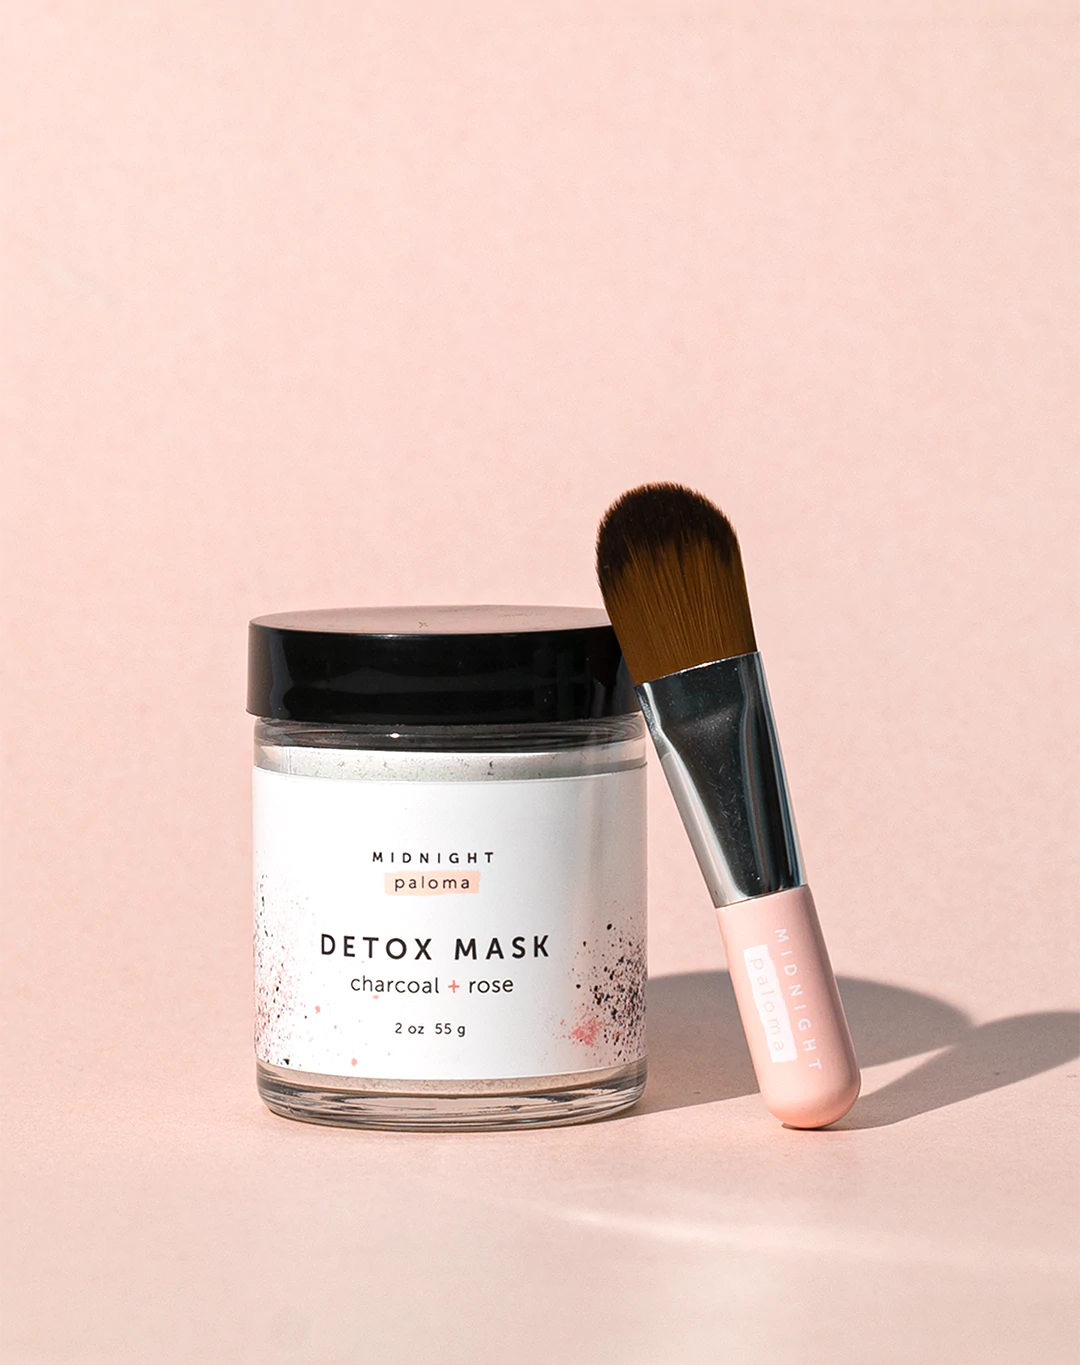 Charcoal +Rose Detox Mask by Midnight Paloma